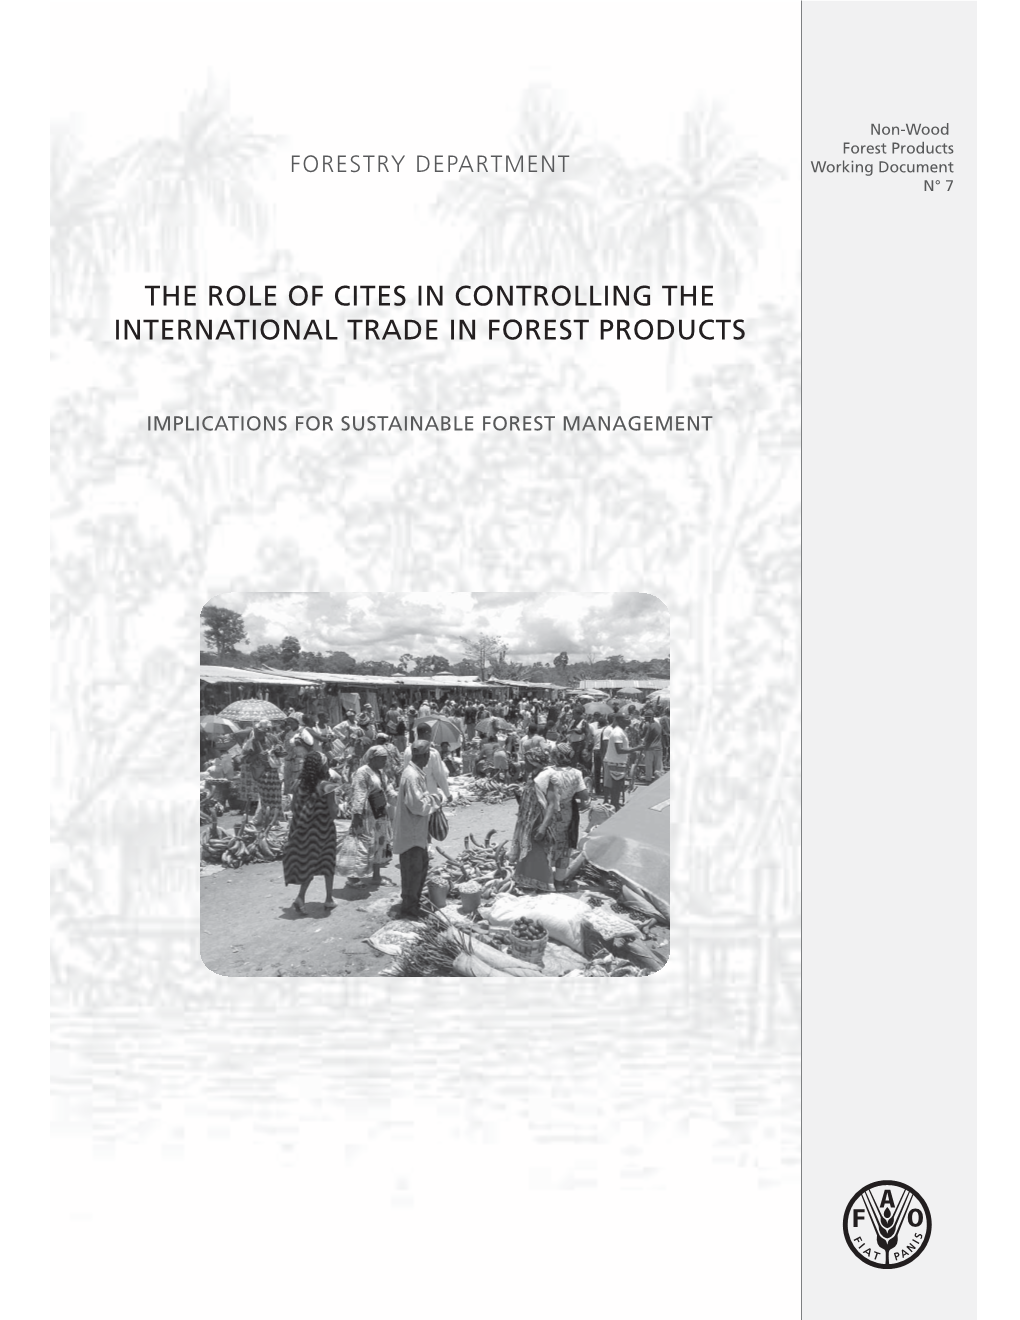 The Role of Cites in Controlling the International Trade in Forest Products